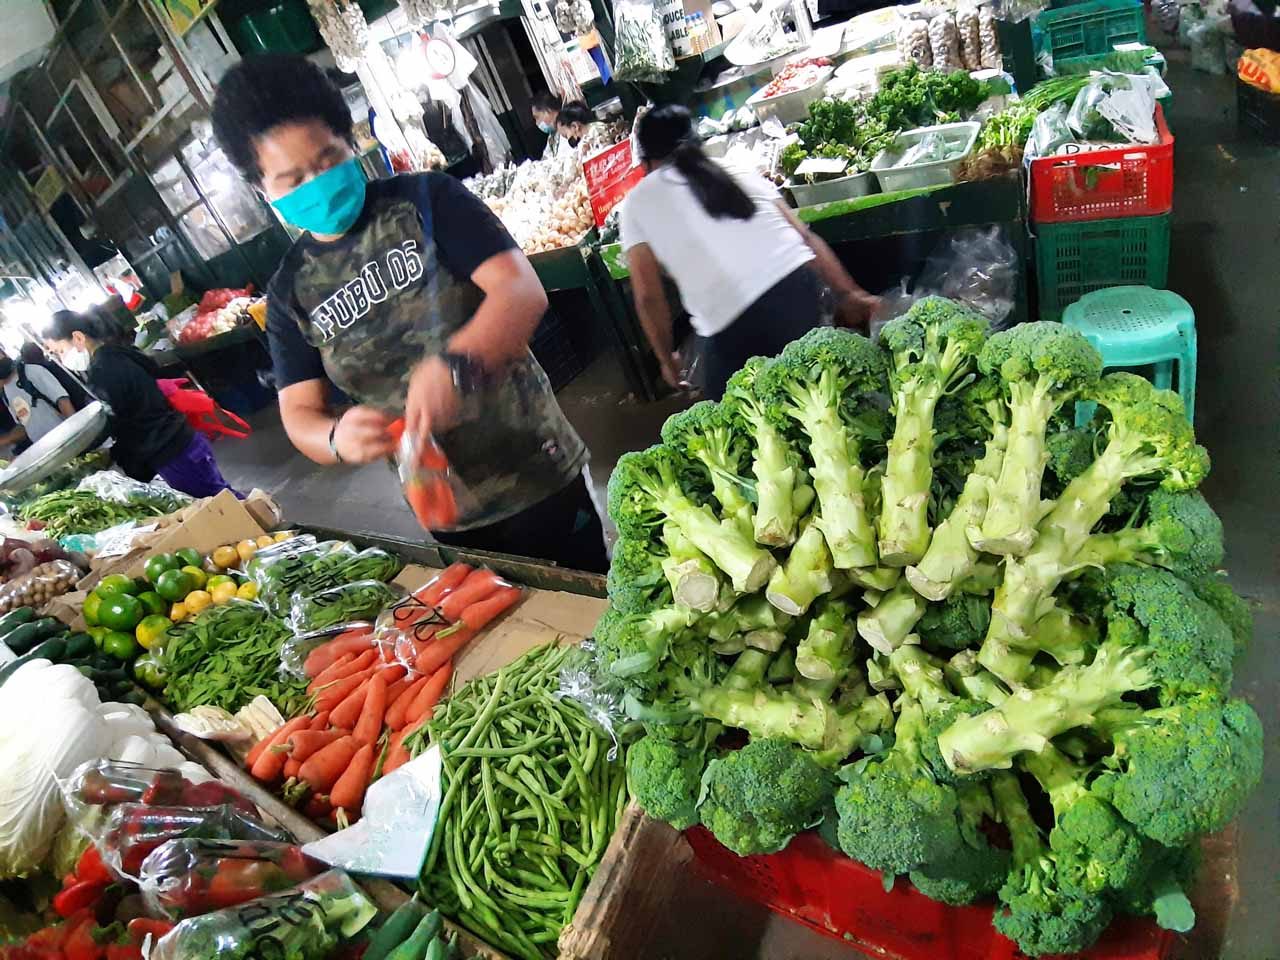 Inflation slows to 2.1% in May 2020